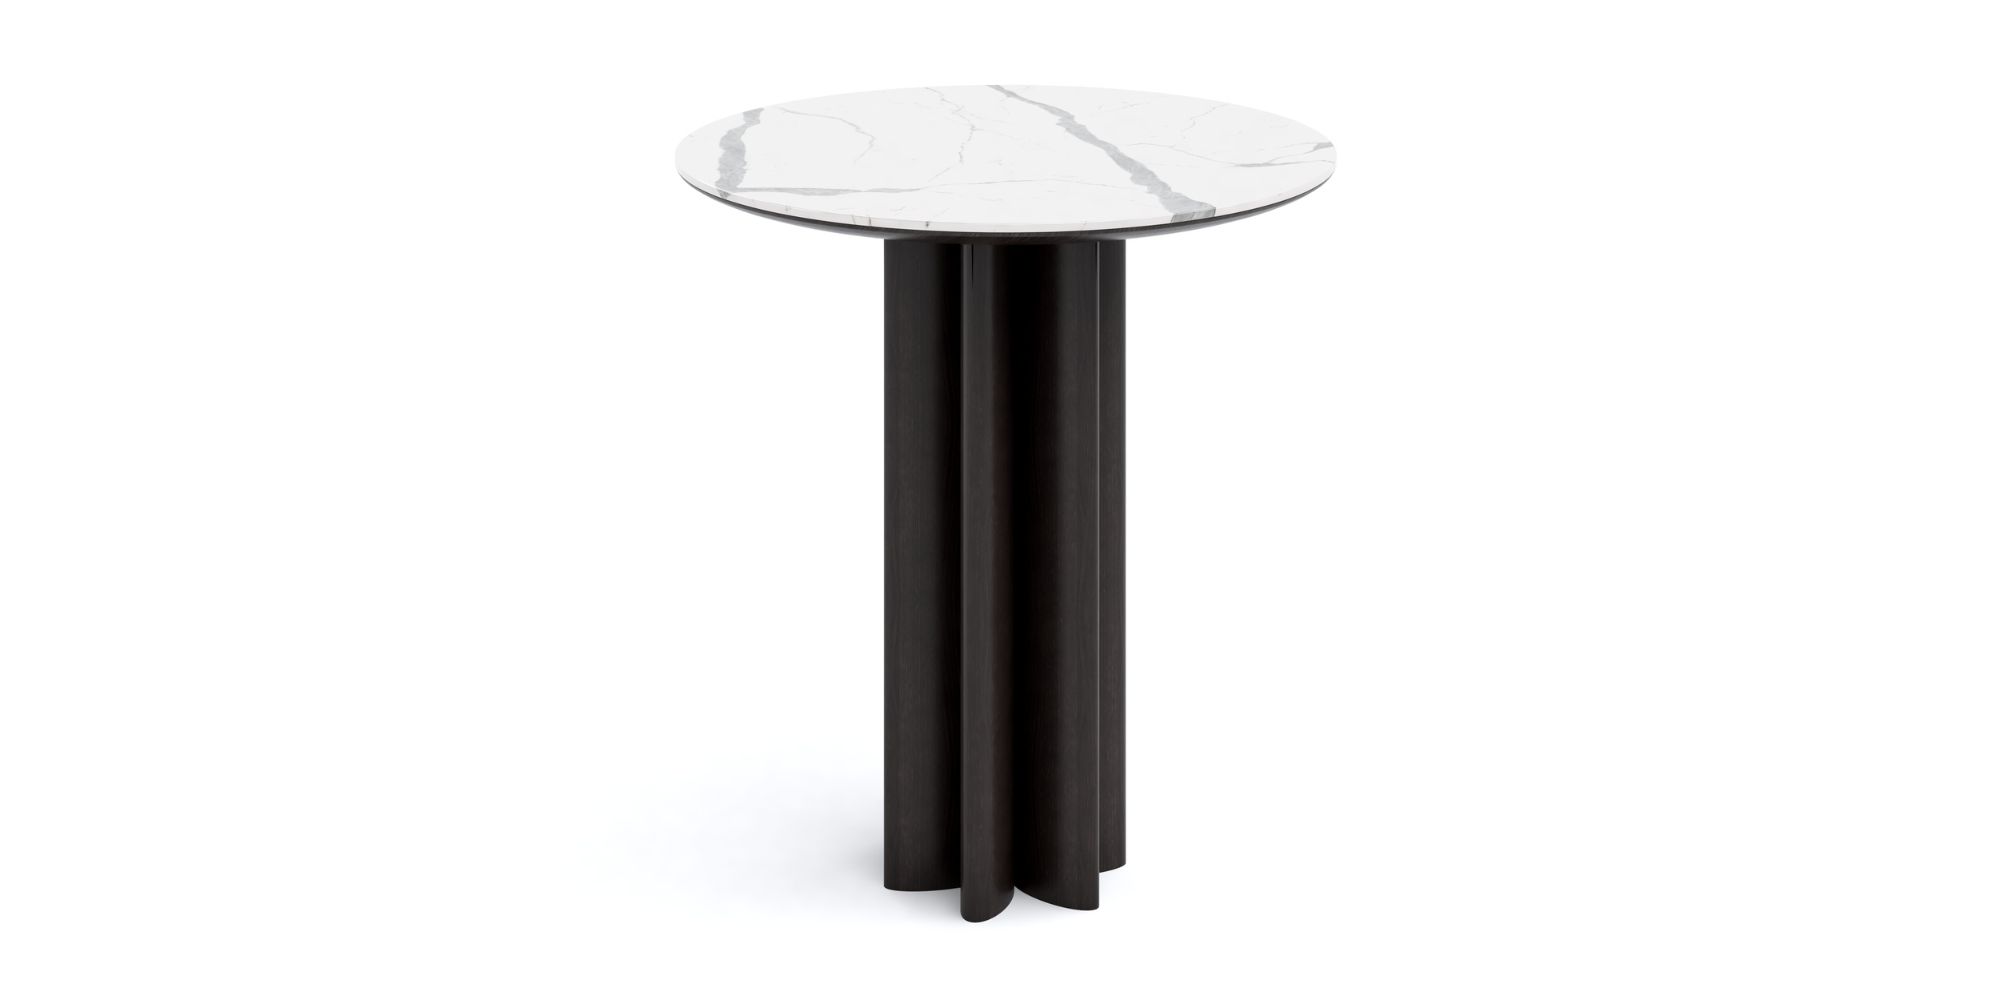 Duoro Porcelain Side Table in Outdoor Tables Side Tables for Porto Asteri collection